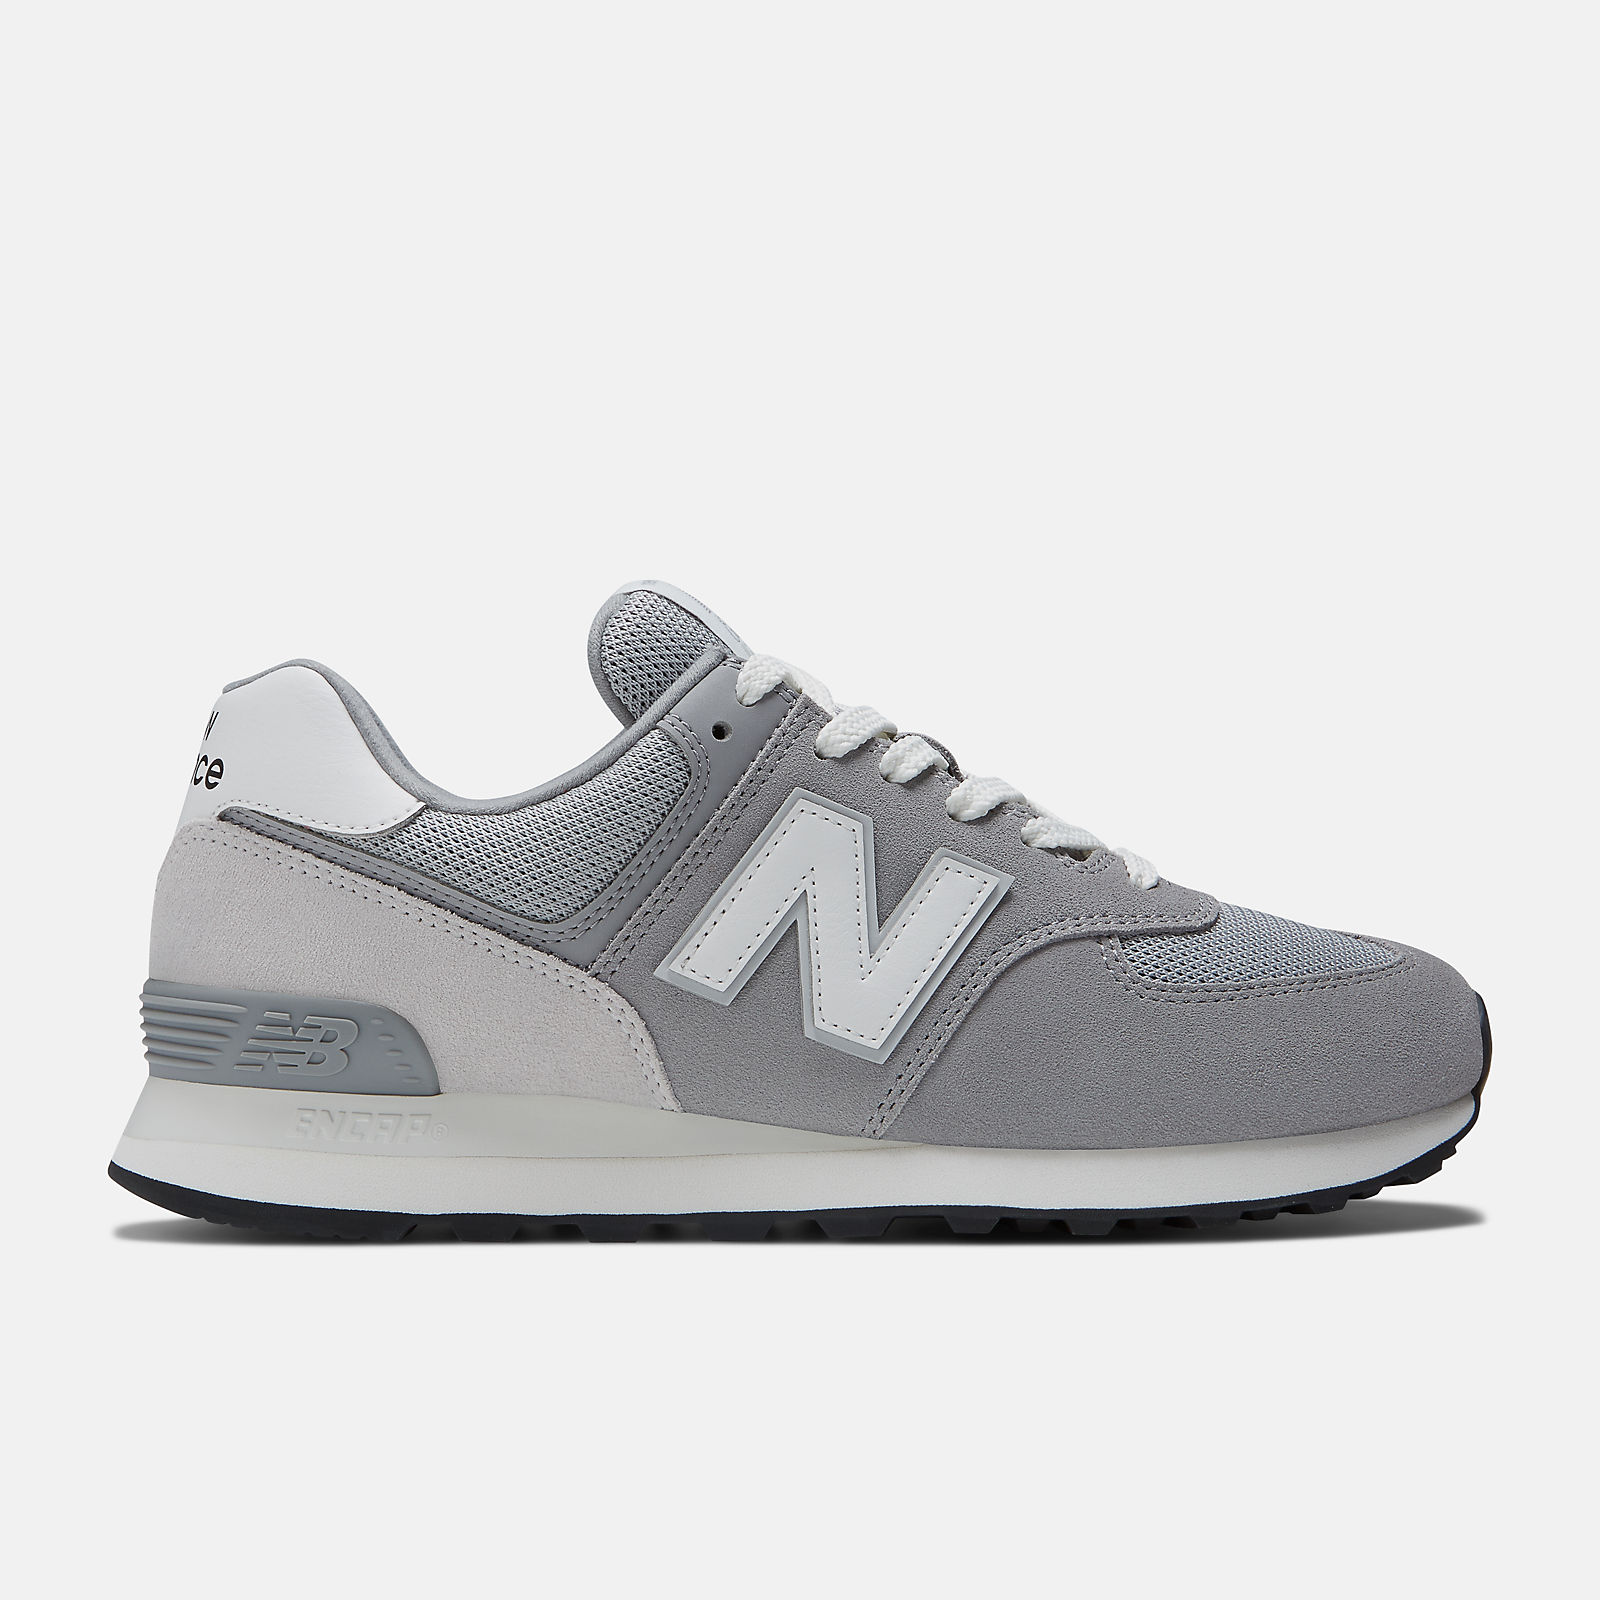 dommer ros spade 574 - New Balance